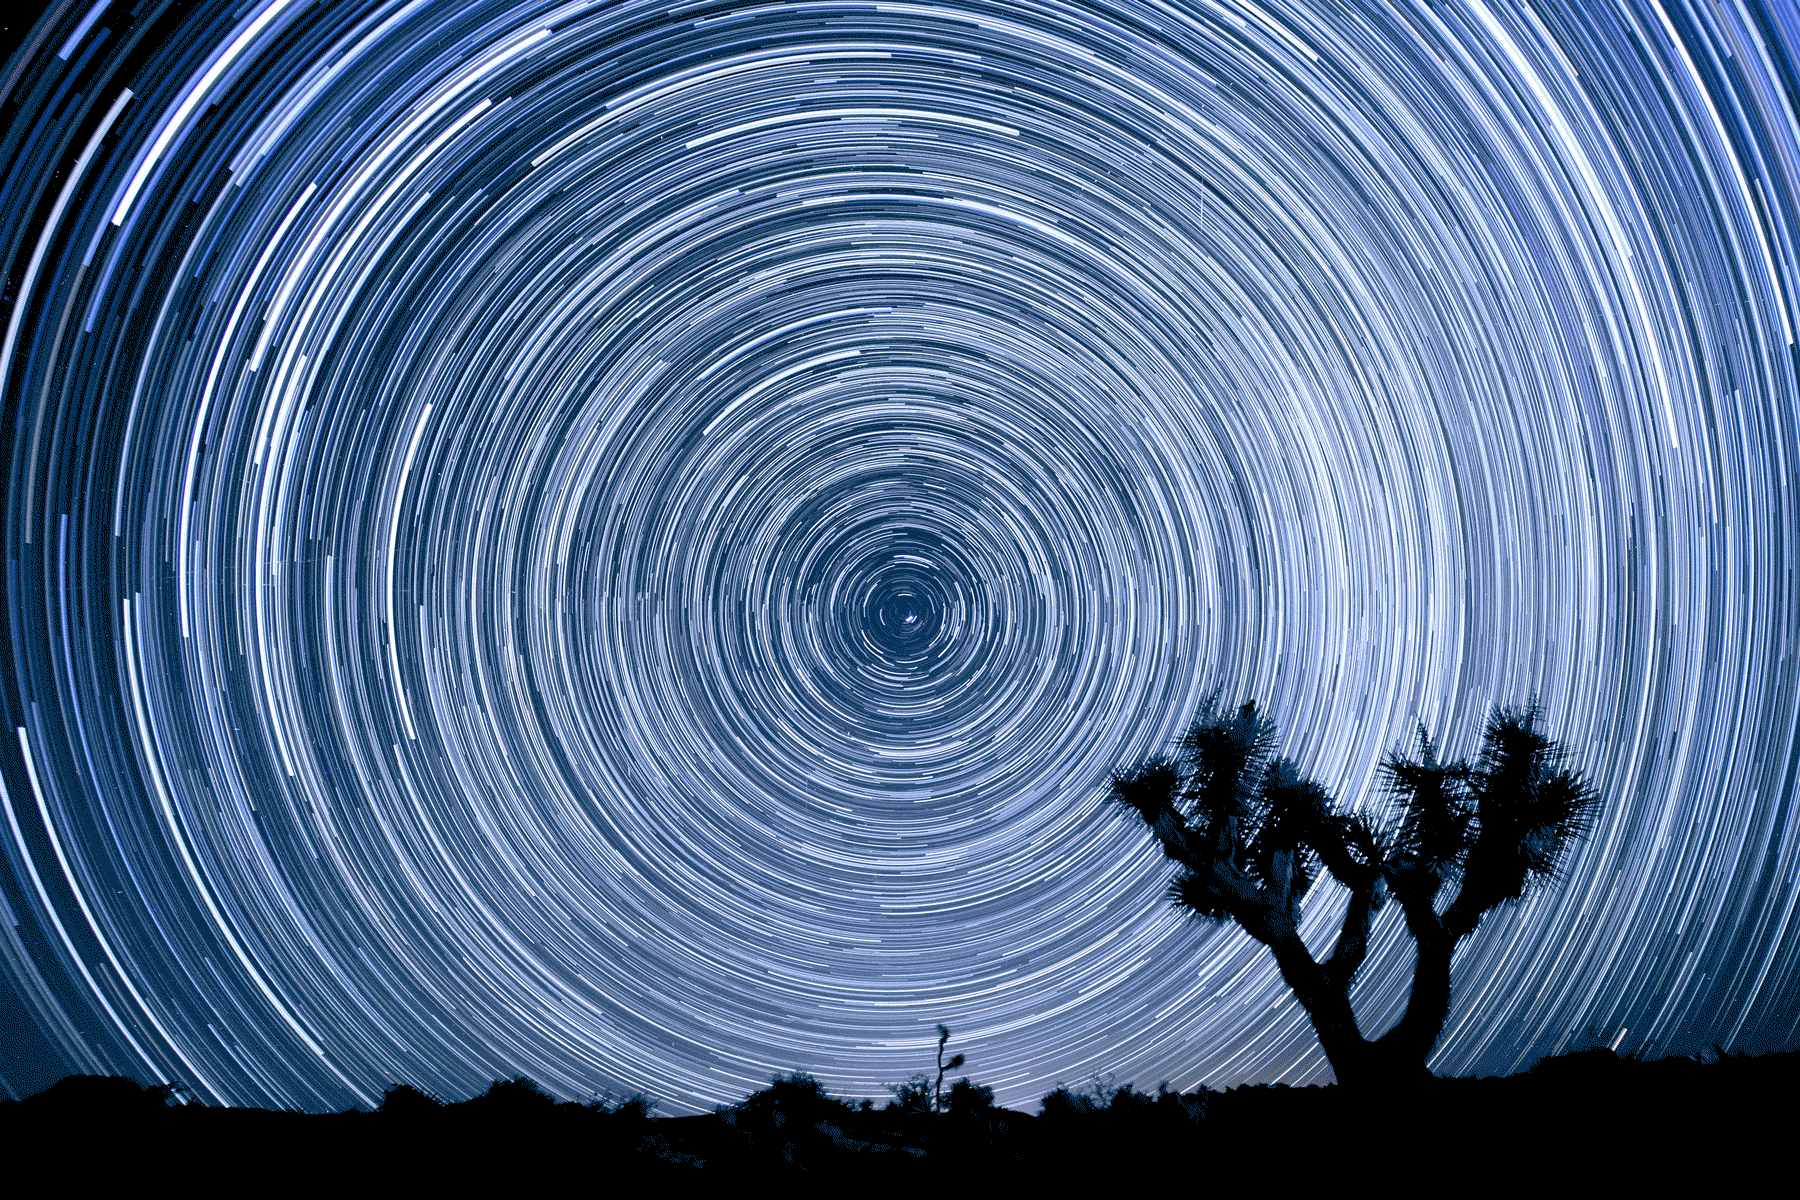 The image of star trails of Polaris and the northern sky was created using more than 100 individual 25-second exposures